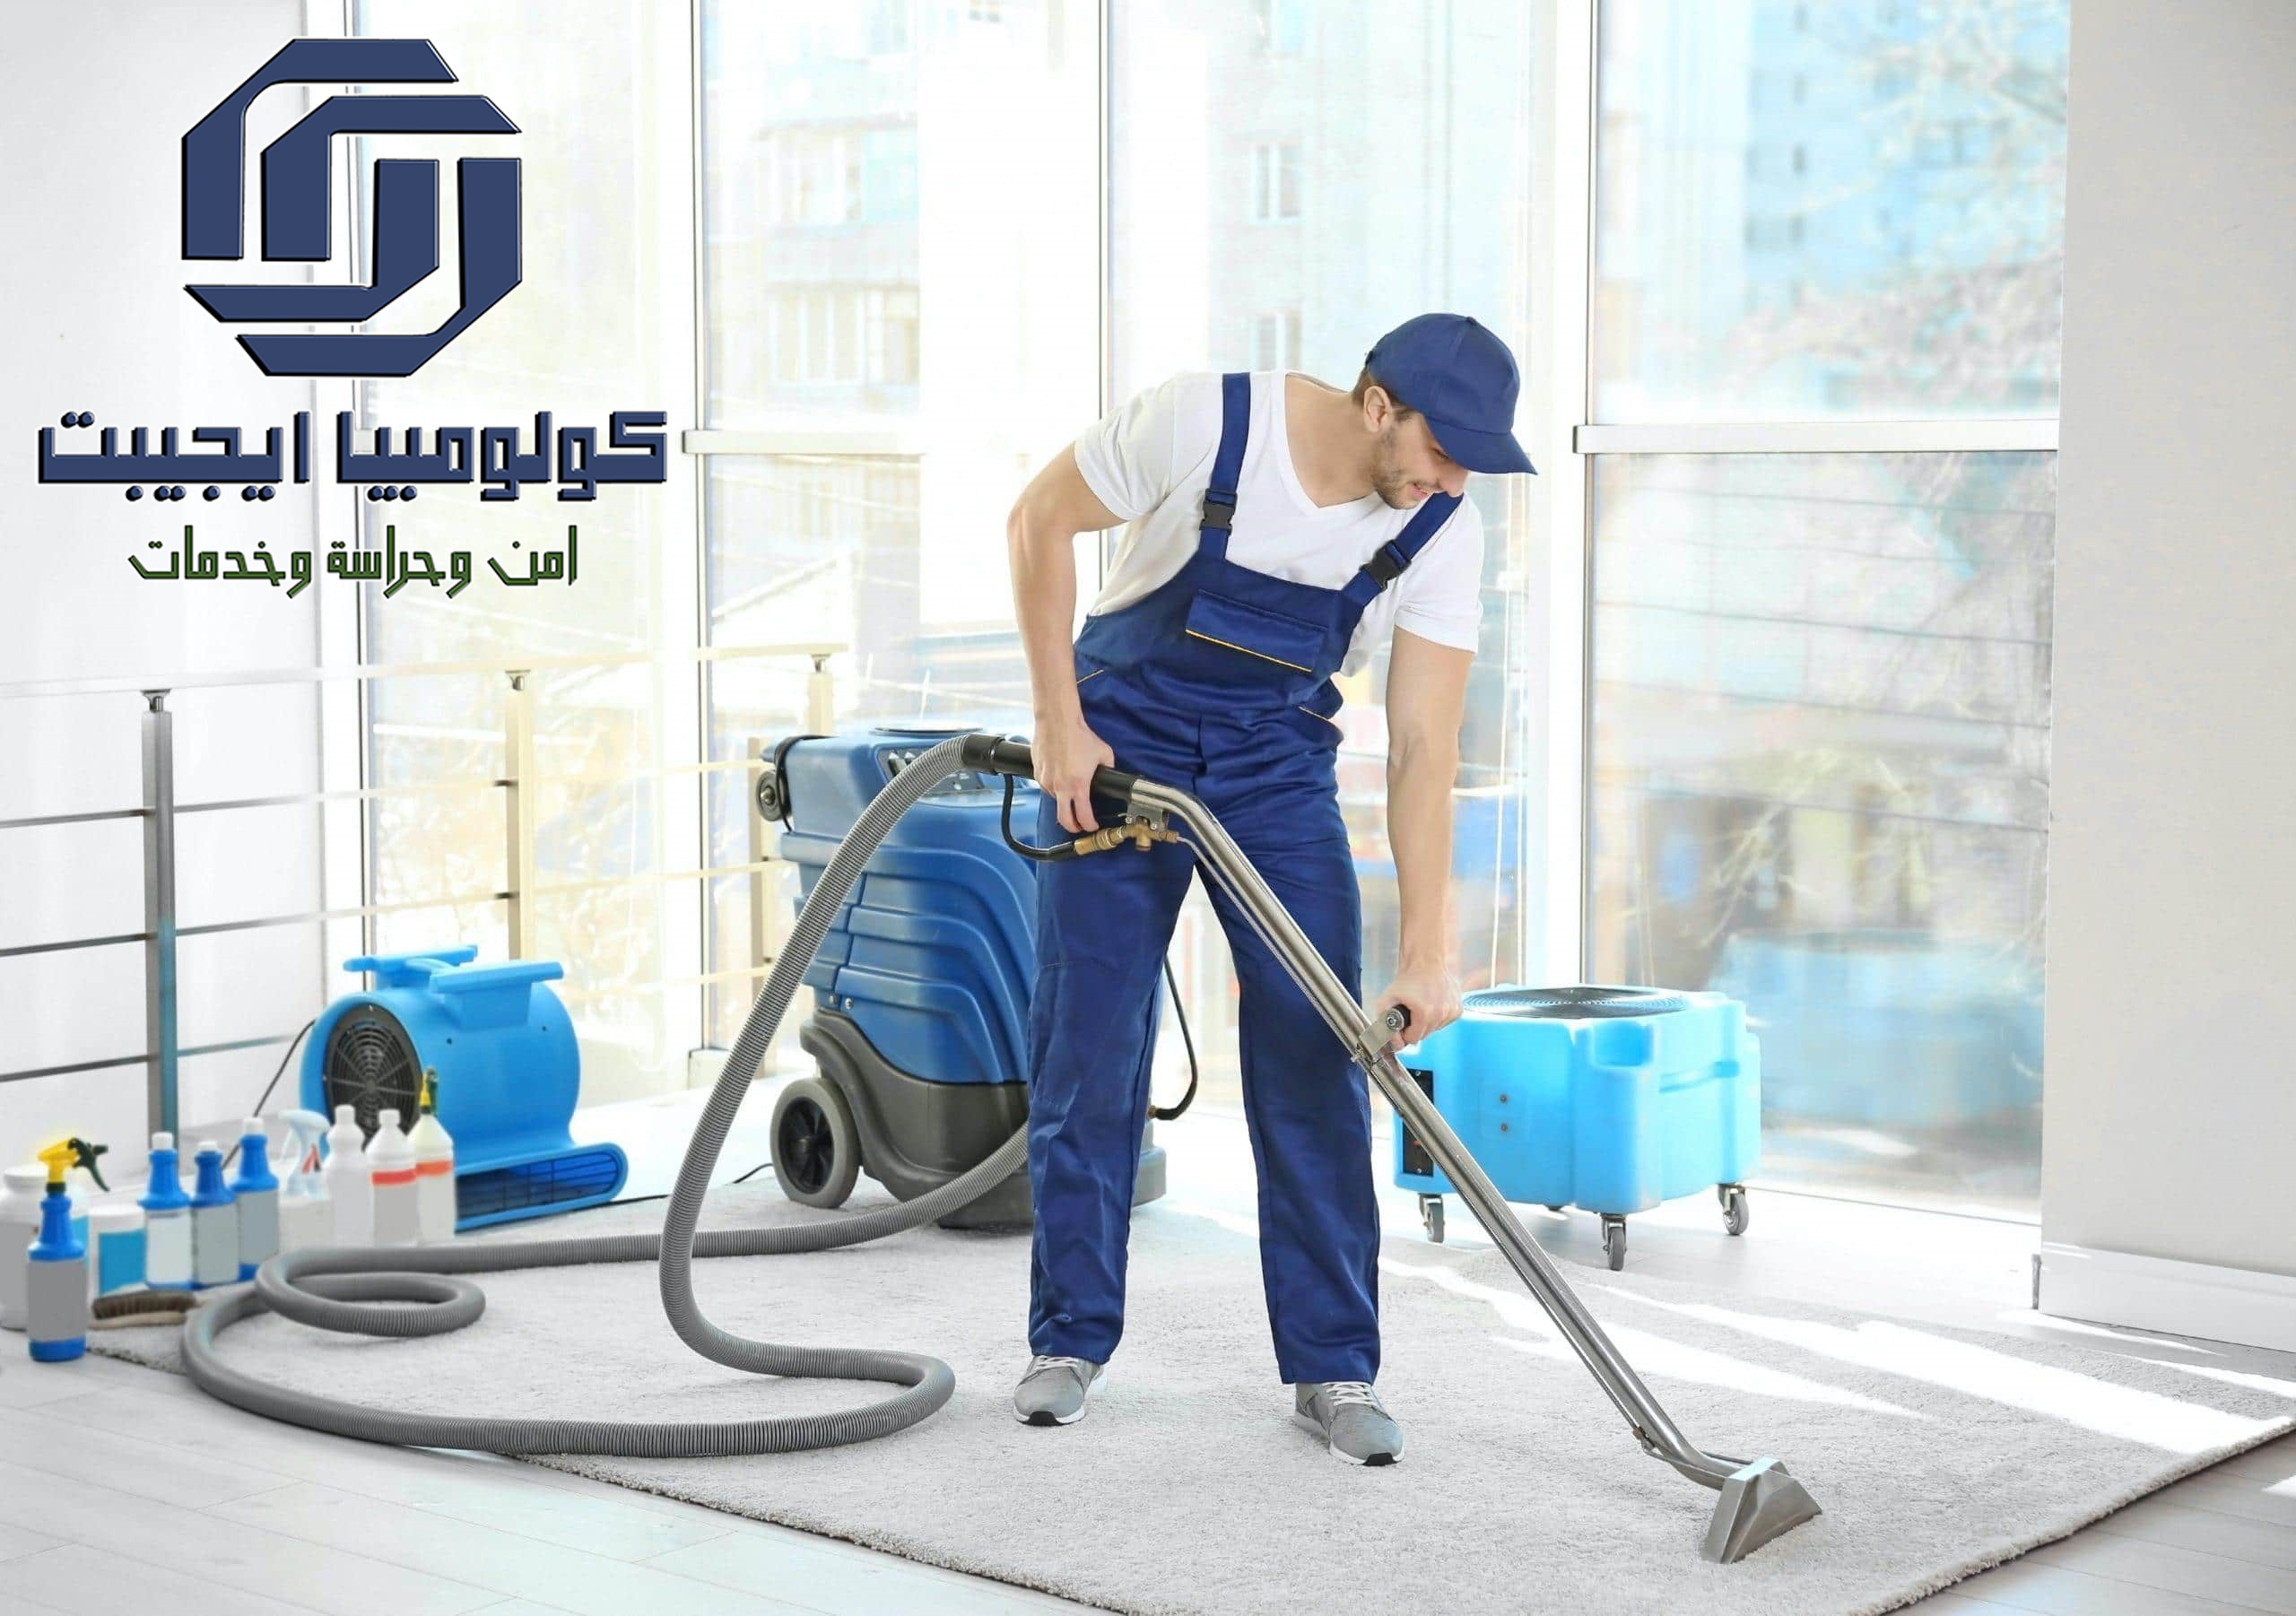 Coloumbia Egypt Co - The role of cleanliness in maintaining healthy